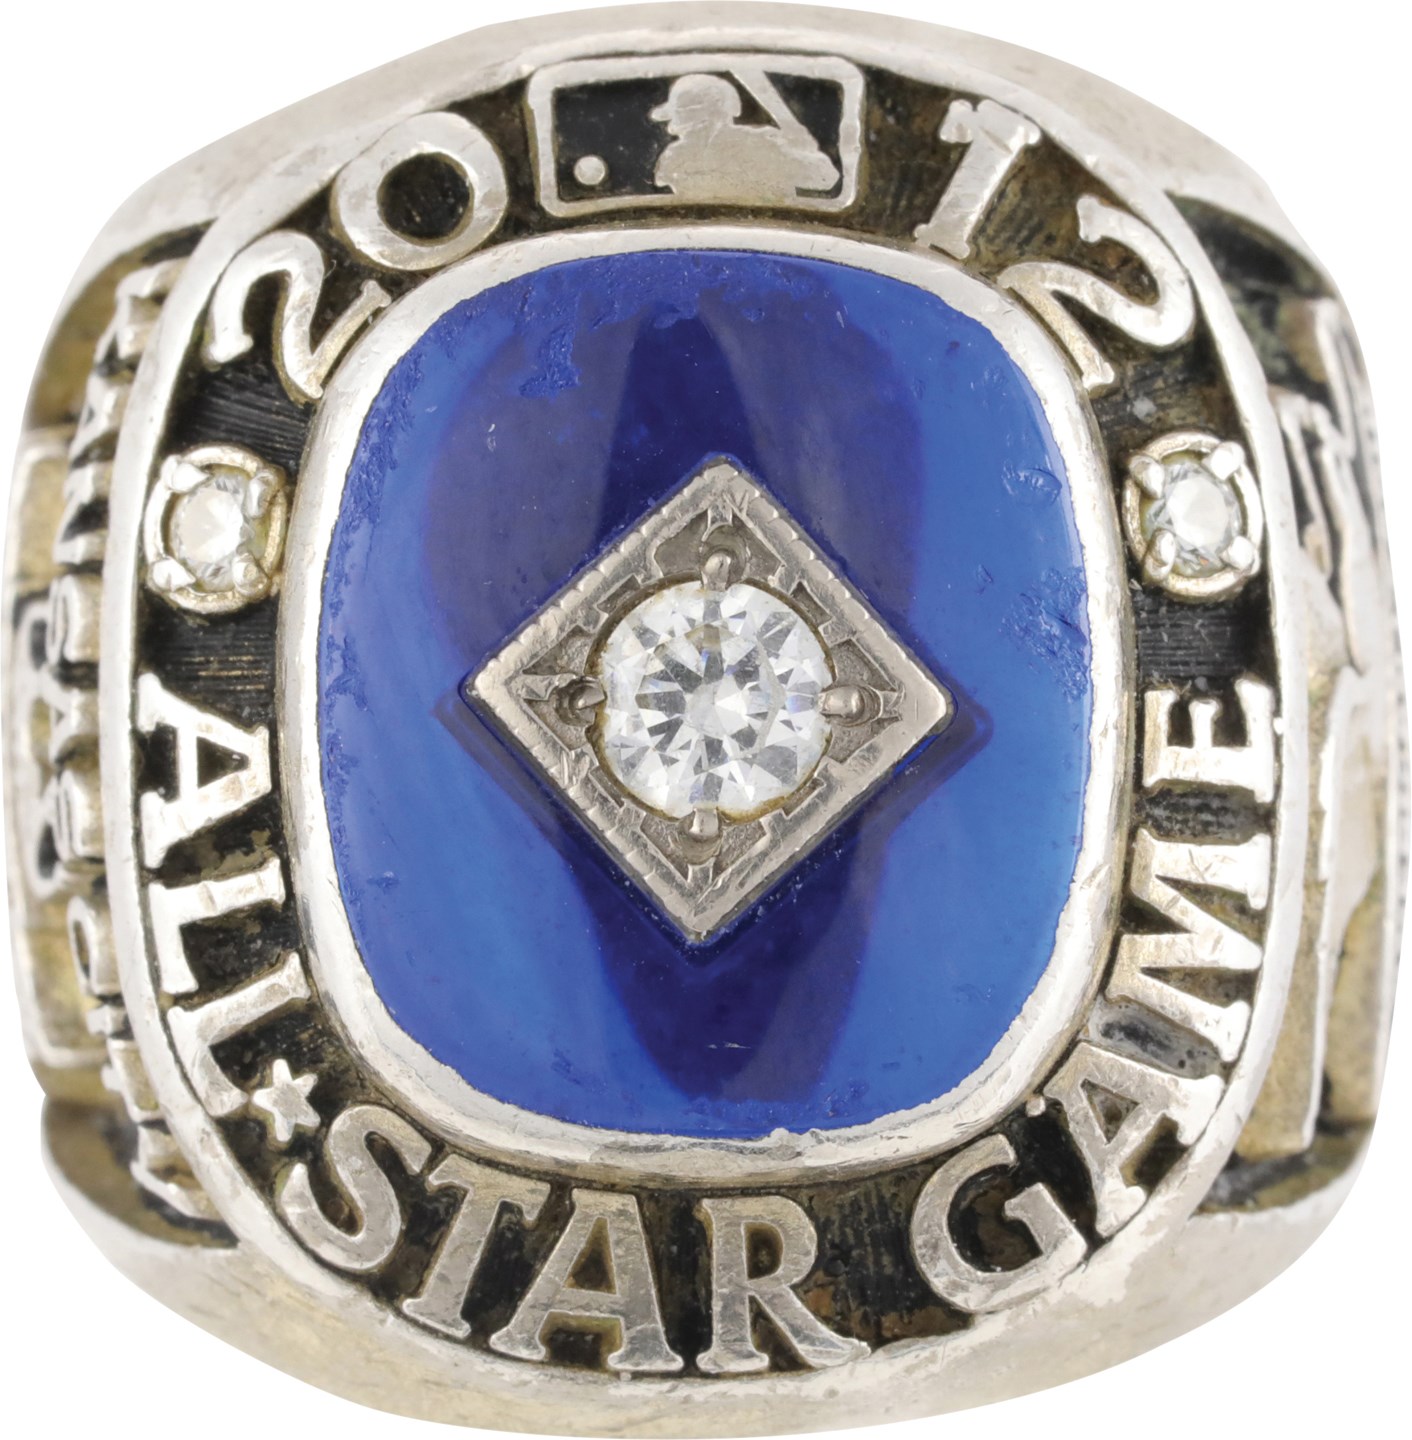 - 2012 American League All-Star Game Ring